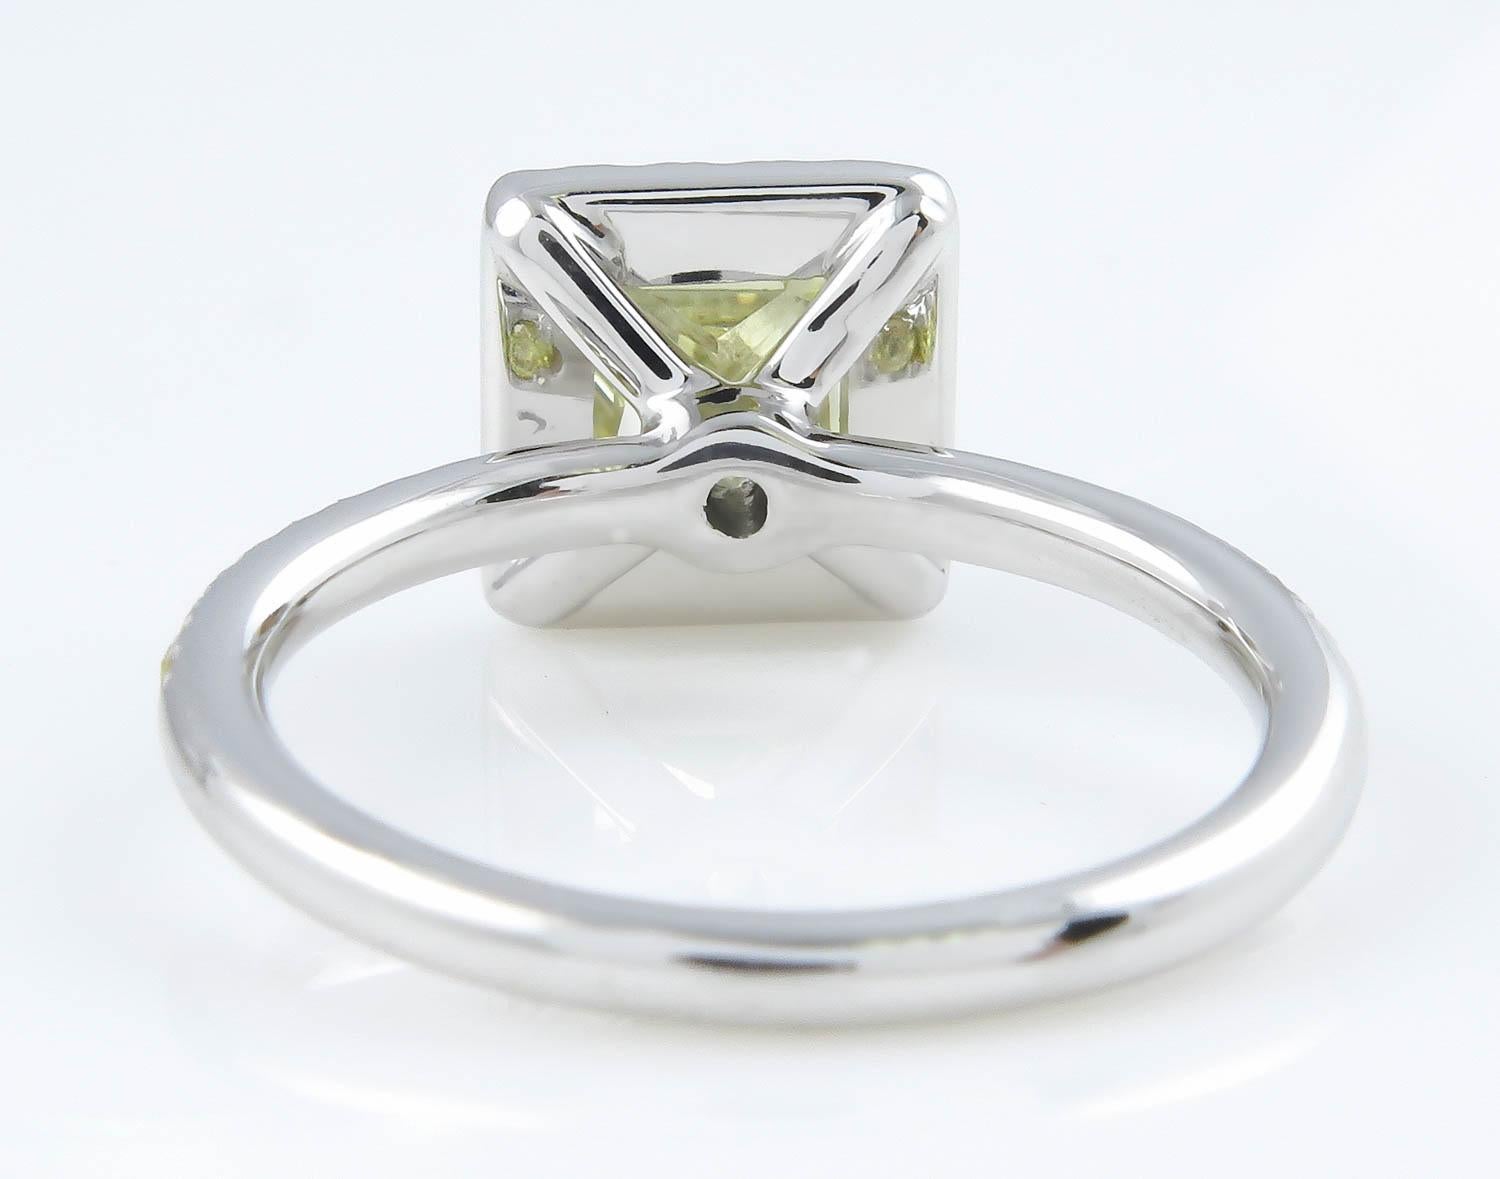 GIA 1.55 Carat Fancy Yellow Radiant Diamond Engagement Wedding Platinum Ring In Good Condition For Sale In New York, NY